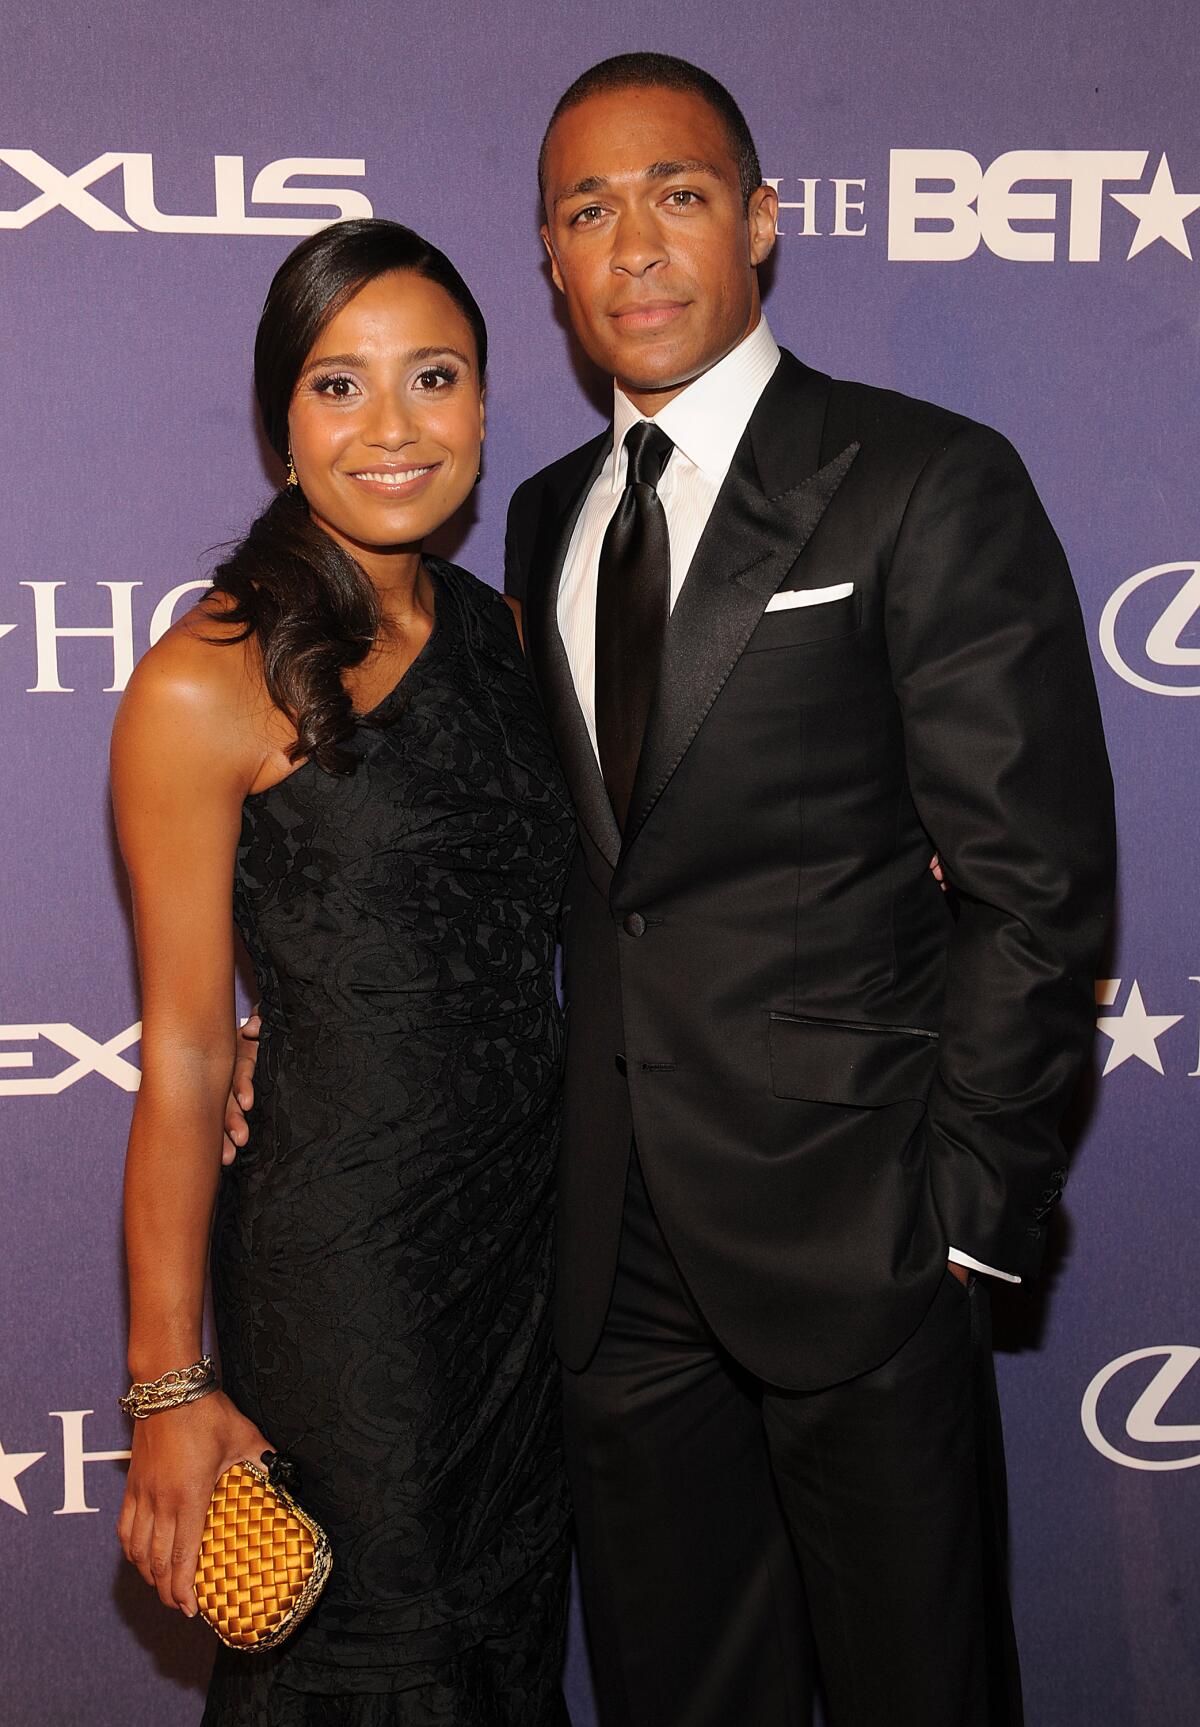 A stylish woman and man stand close together and pose in semiformal attire at an event